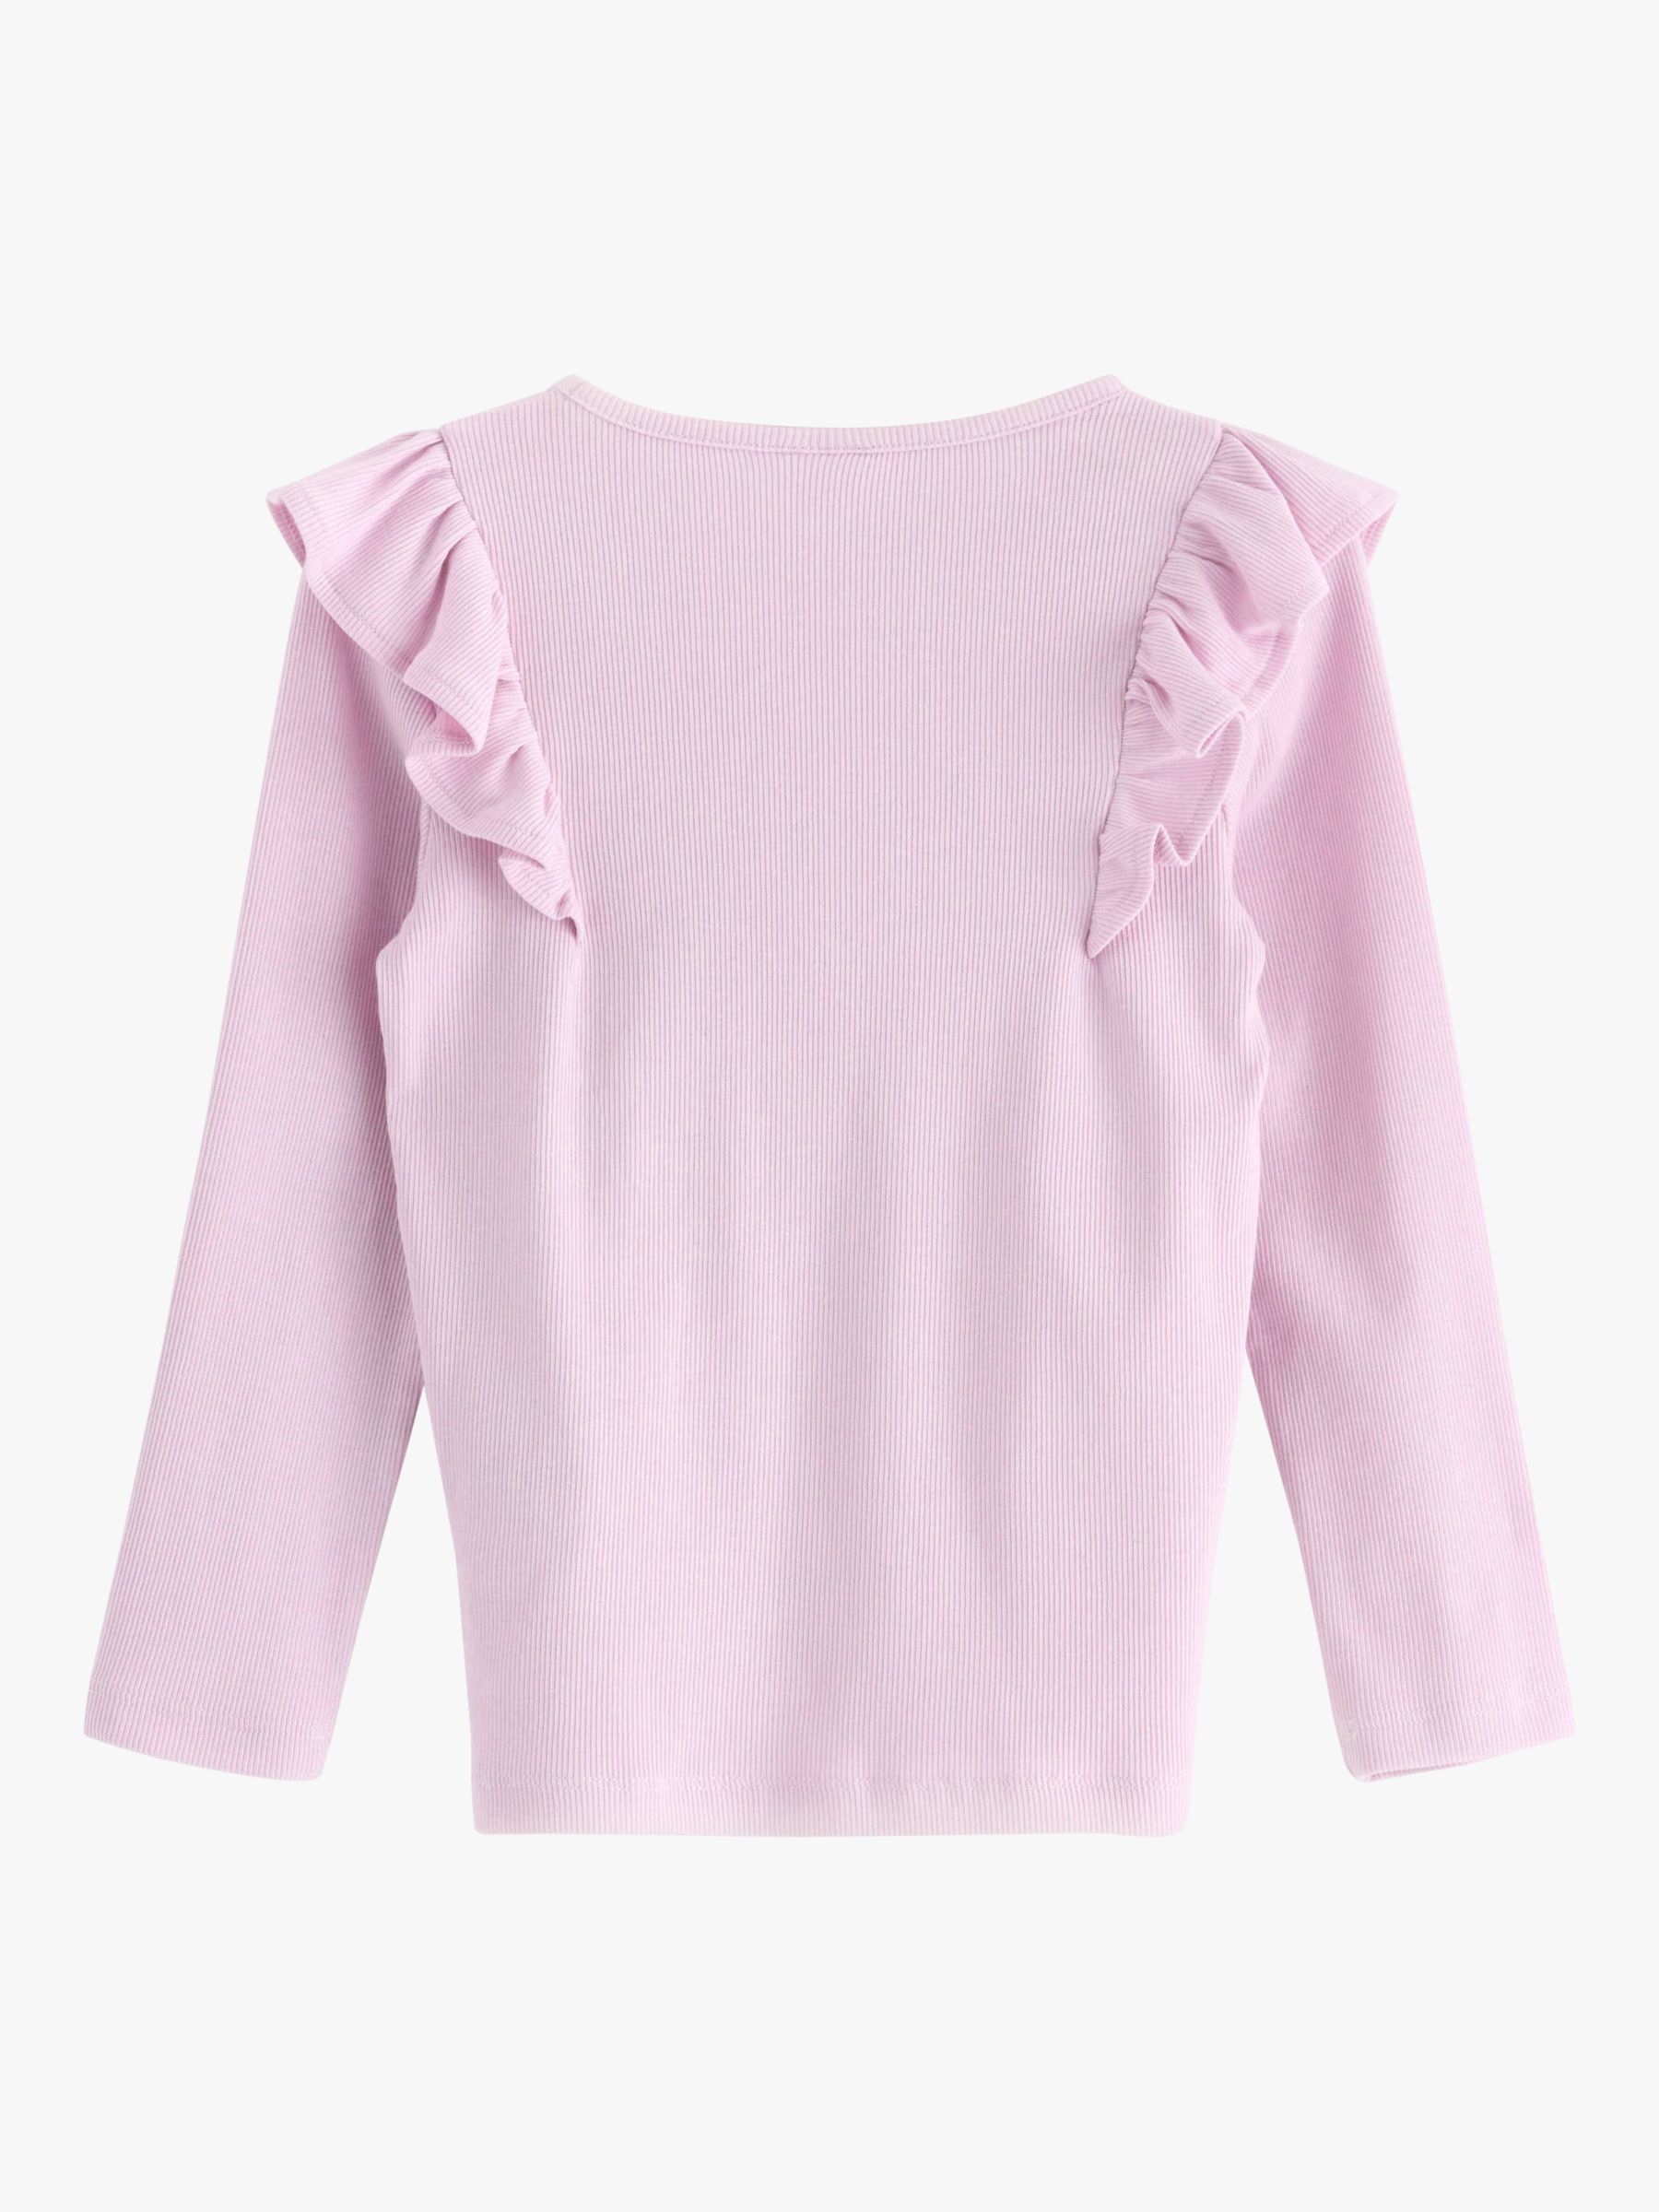 Lindex Kids' Organic Cotton Blend Solid Frill Detail Top, Dusty Pink, 18-24 months